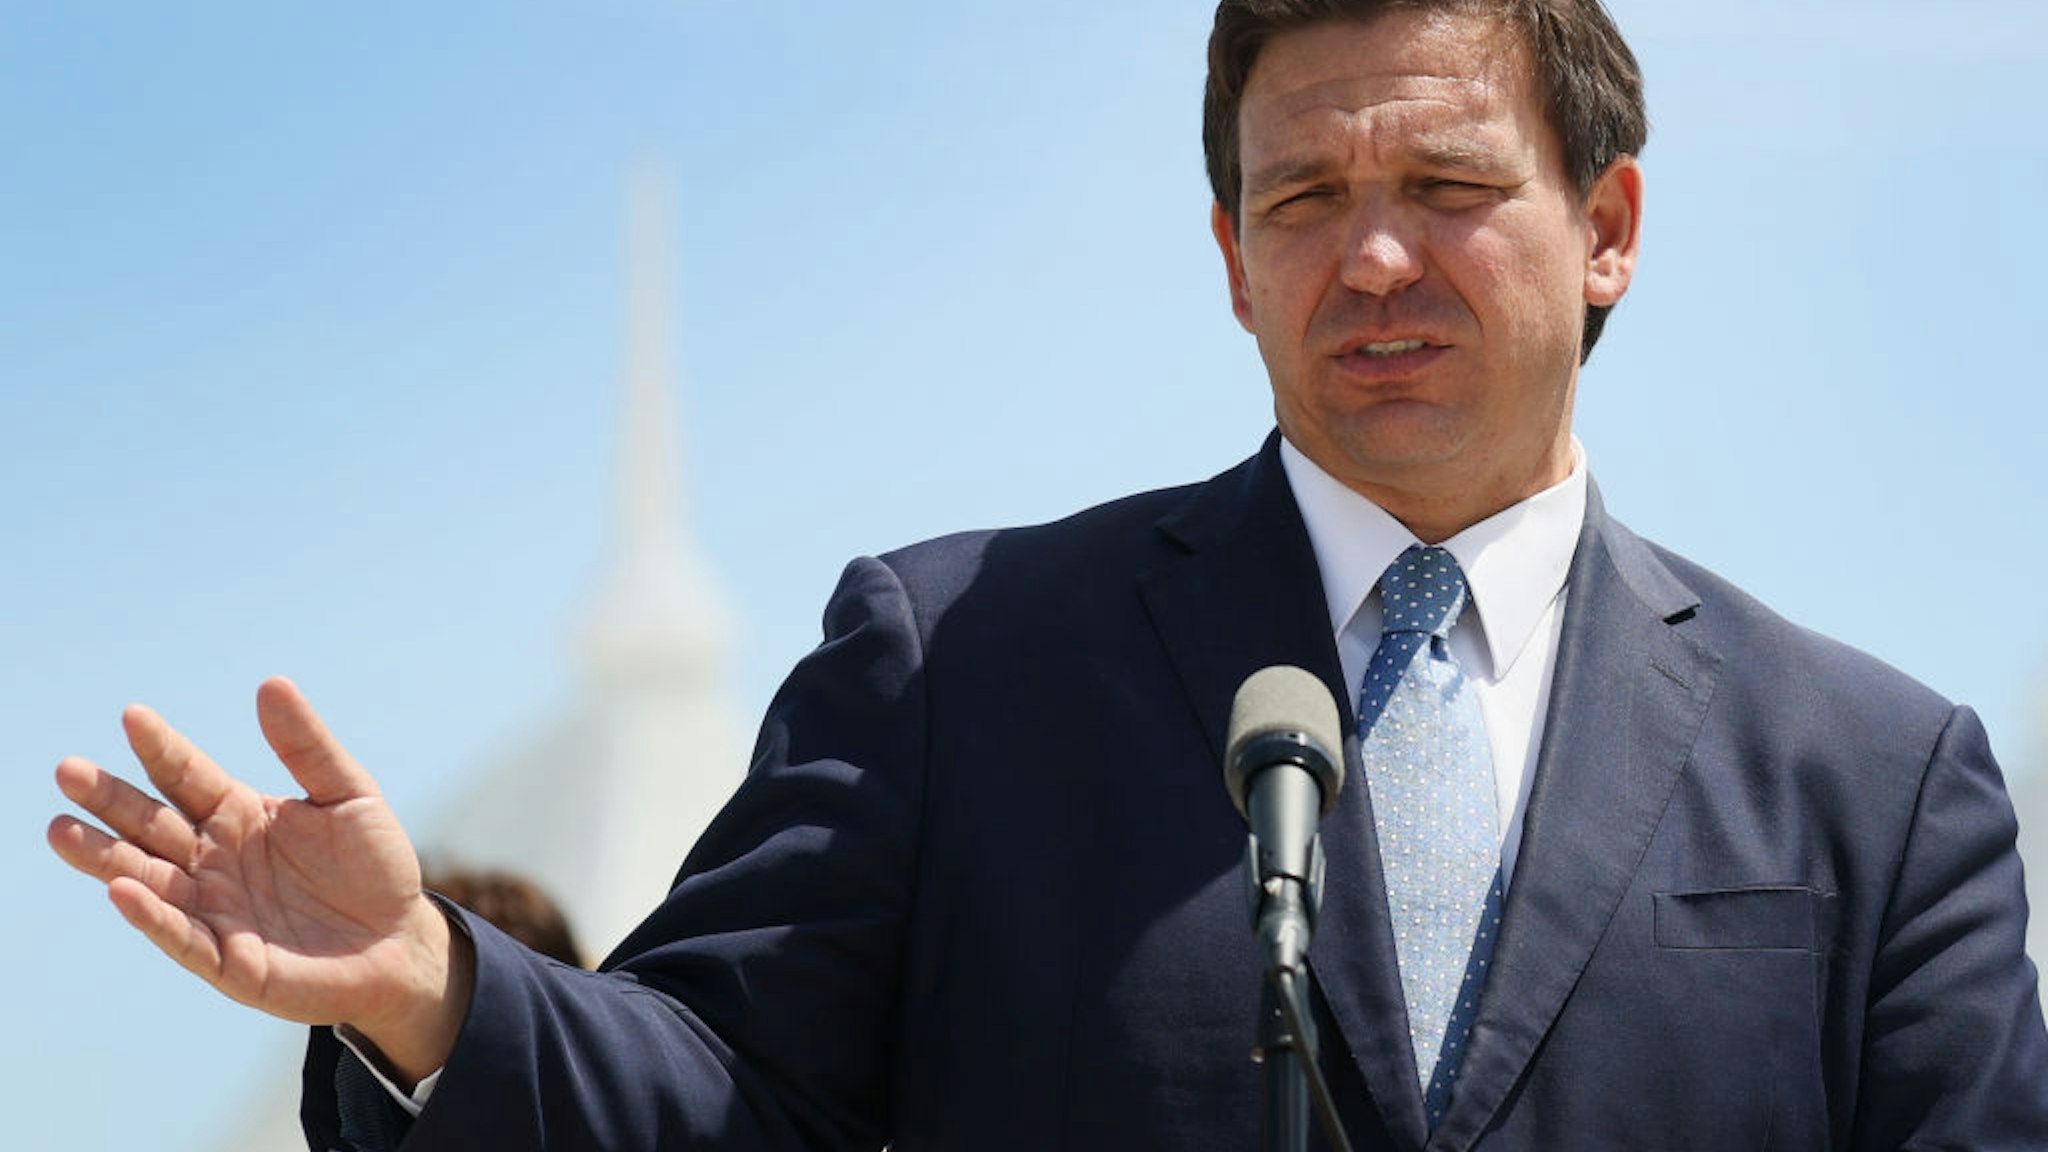 Florida Gov. Ron DeSantis speaks to the media about the cruise industry during a press conference at PortMiami on April 08, 2021 in Miami, Florida.